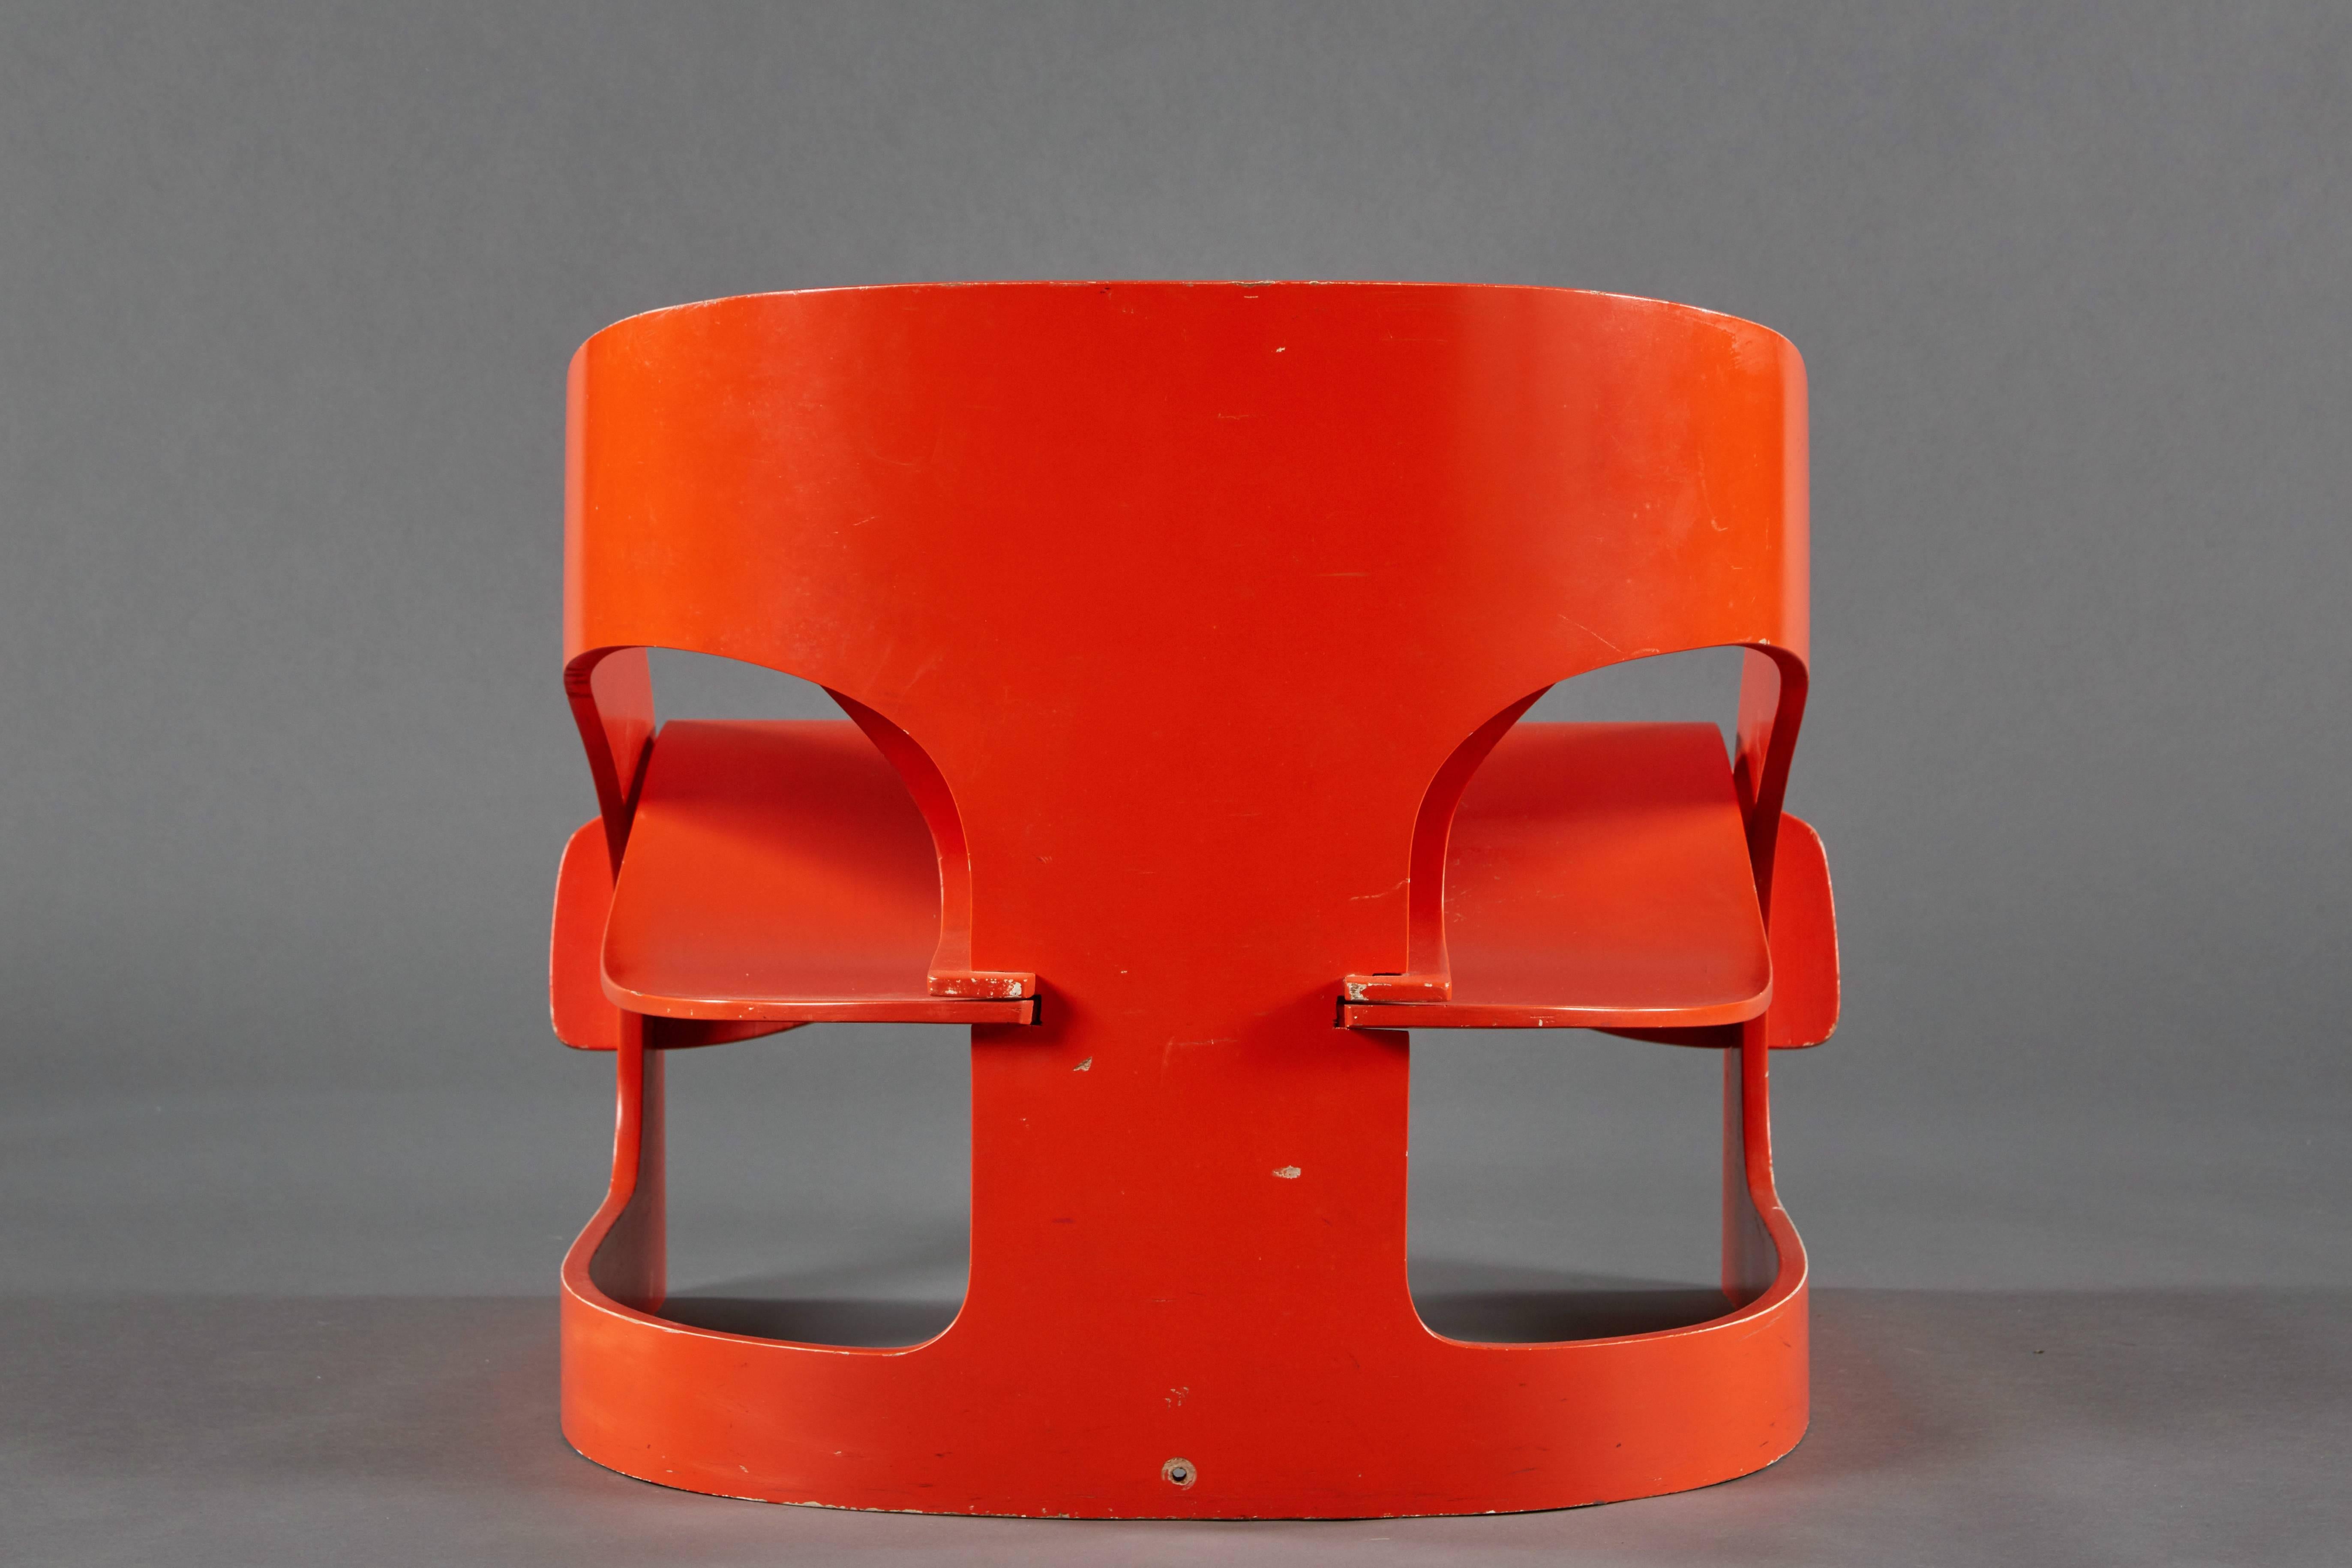 Molded Red Lacquered Sculptural Joe Colombo No. 4801 “Interlocking” Chair